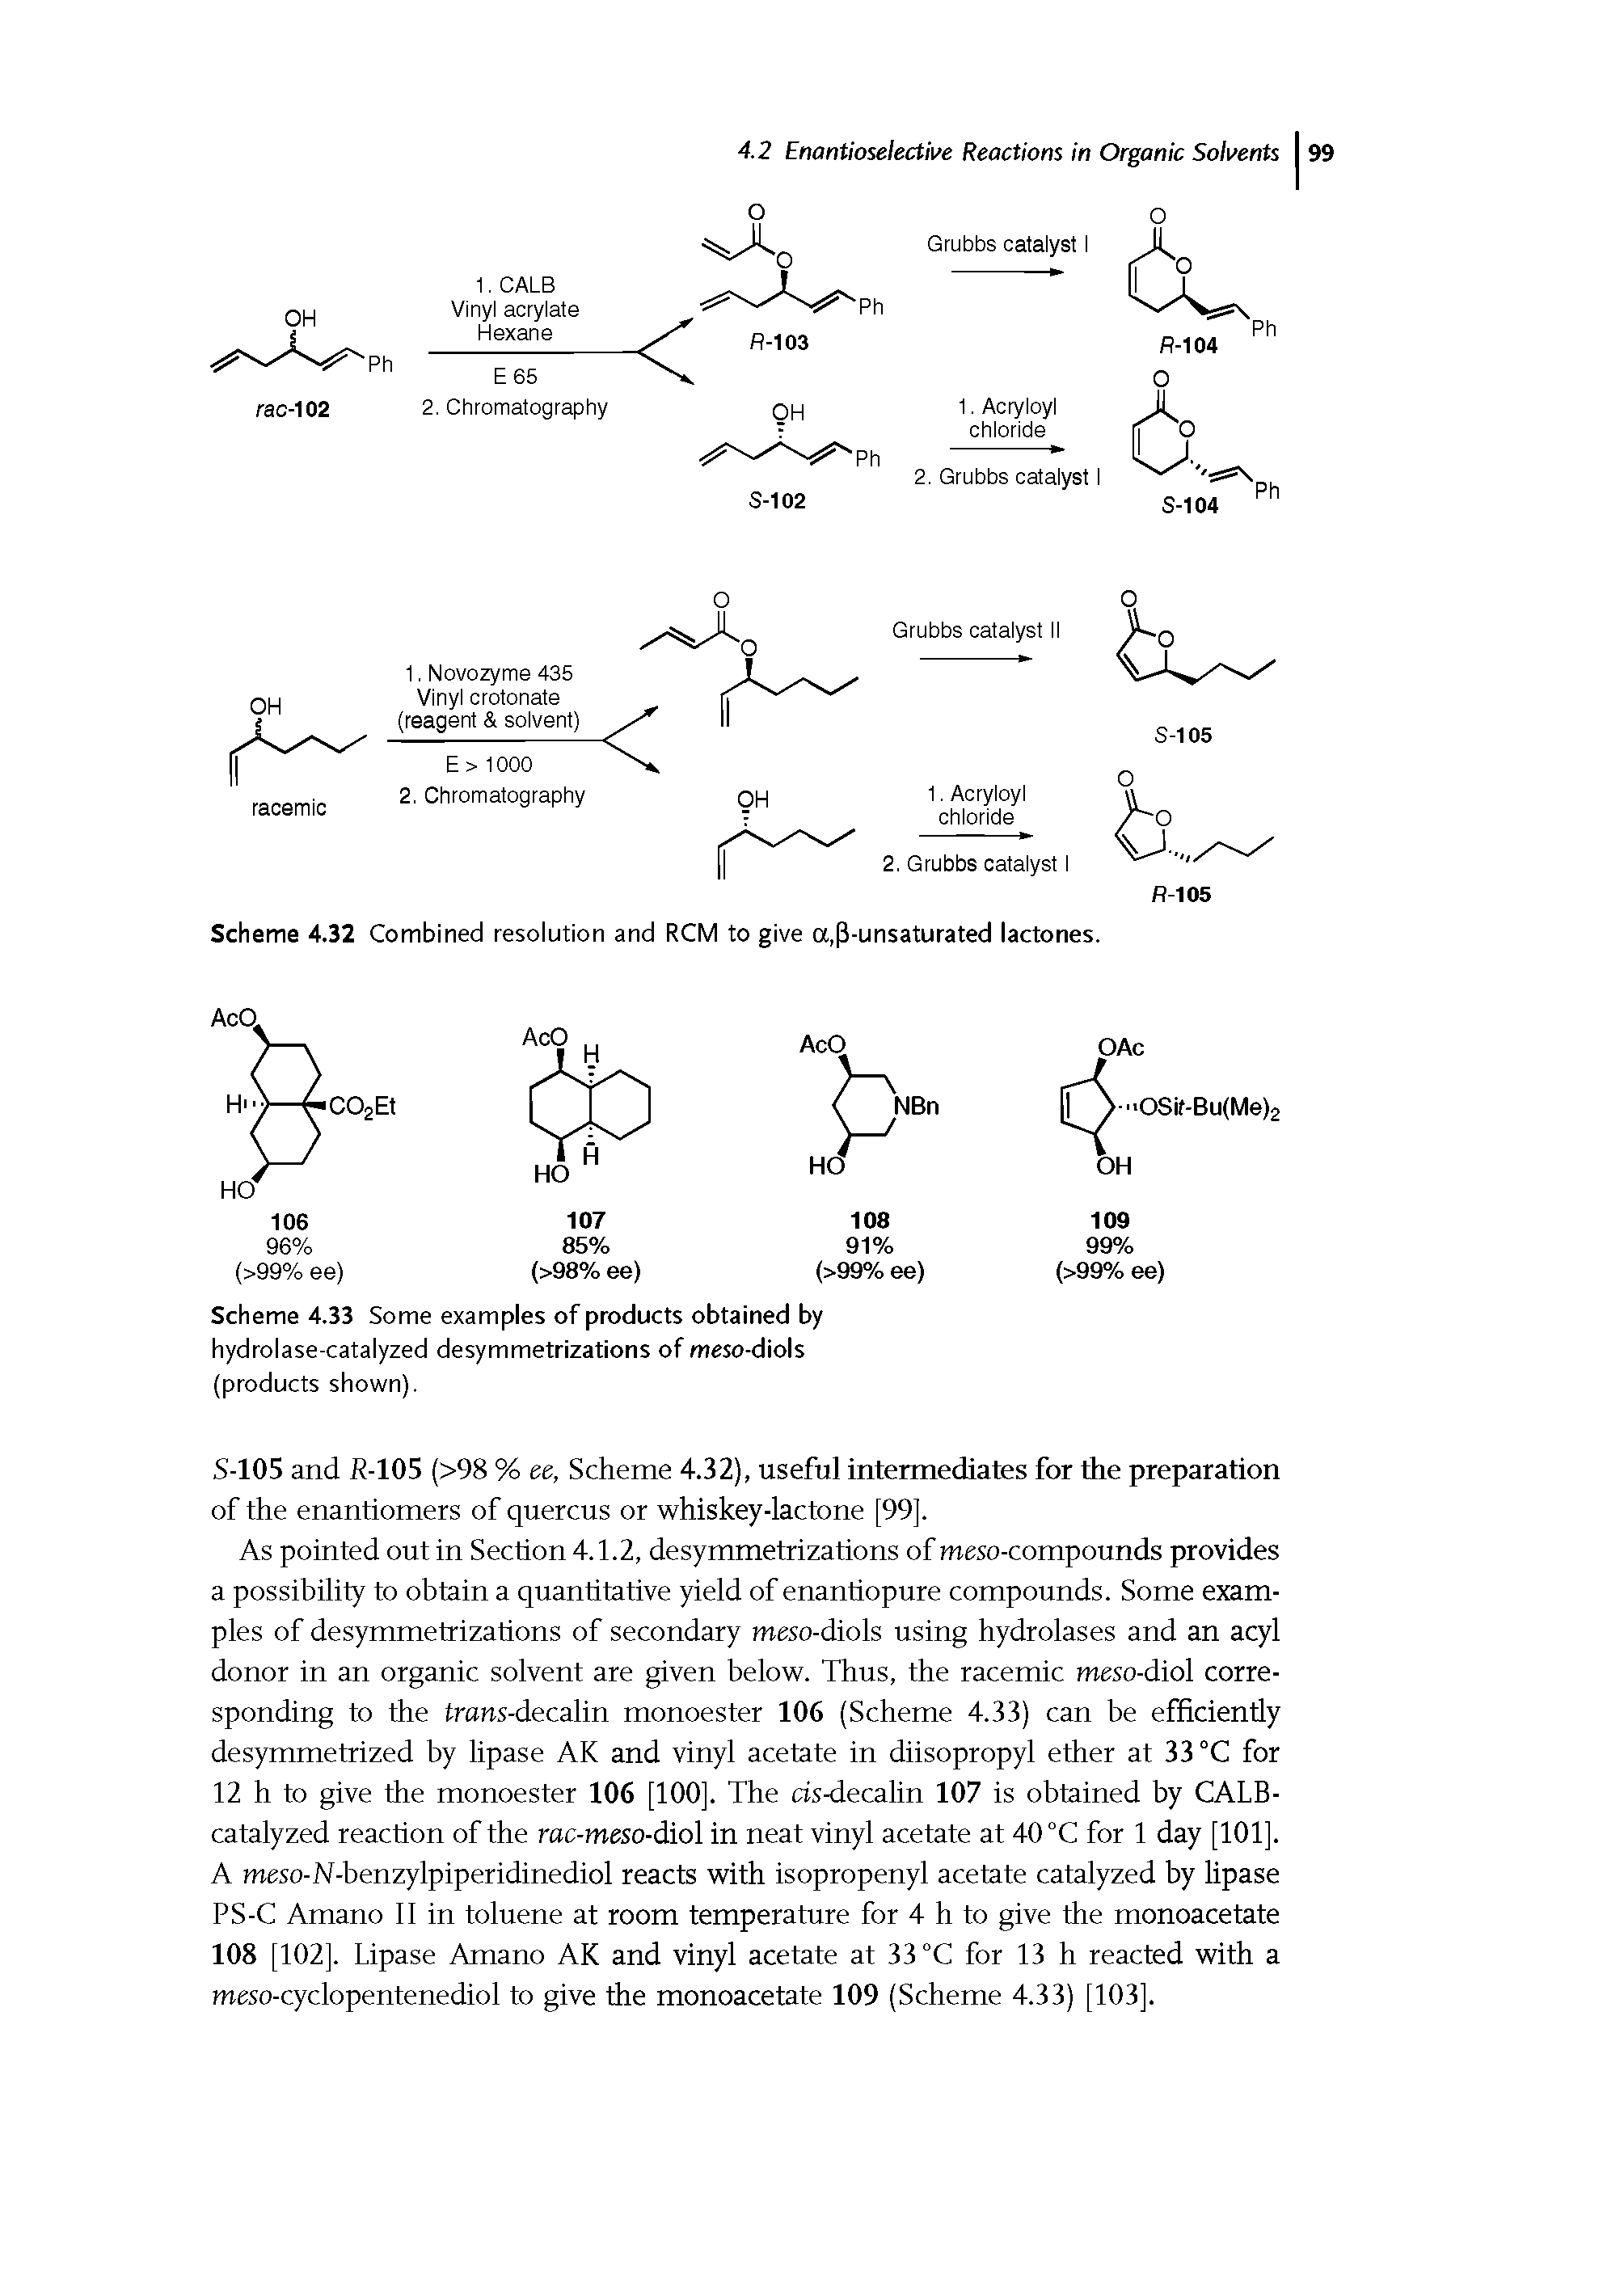 Scheme 4.33 Some examples of products obtained by hydrolase-catalyzed desymmetrizations of meso-diols (products shown).